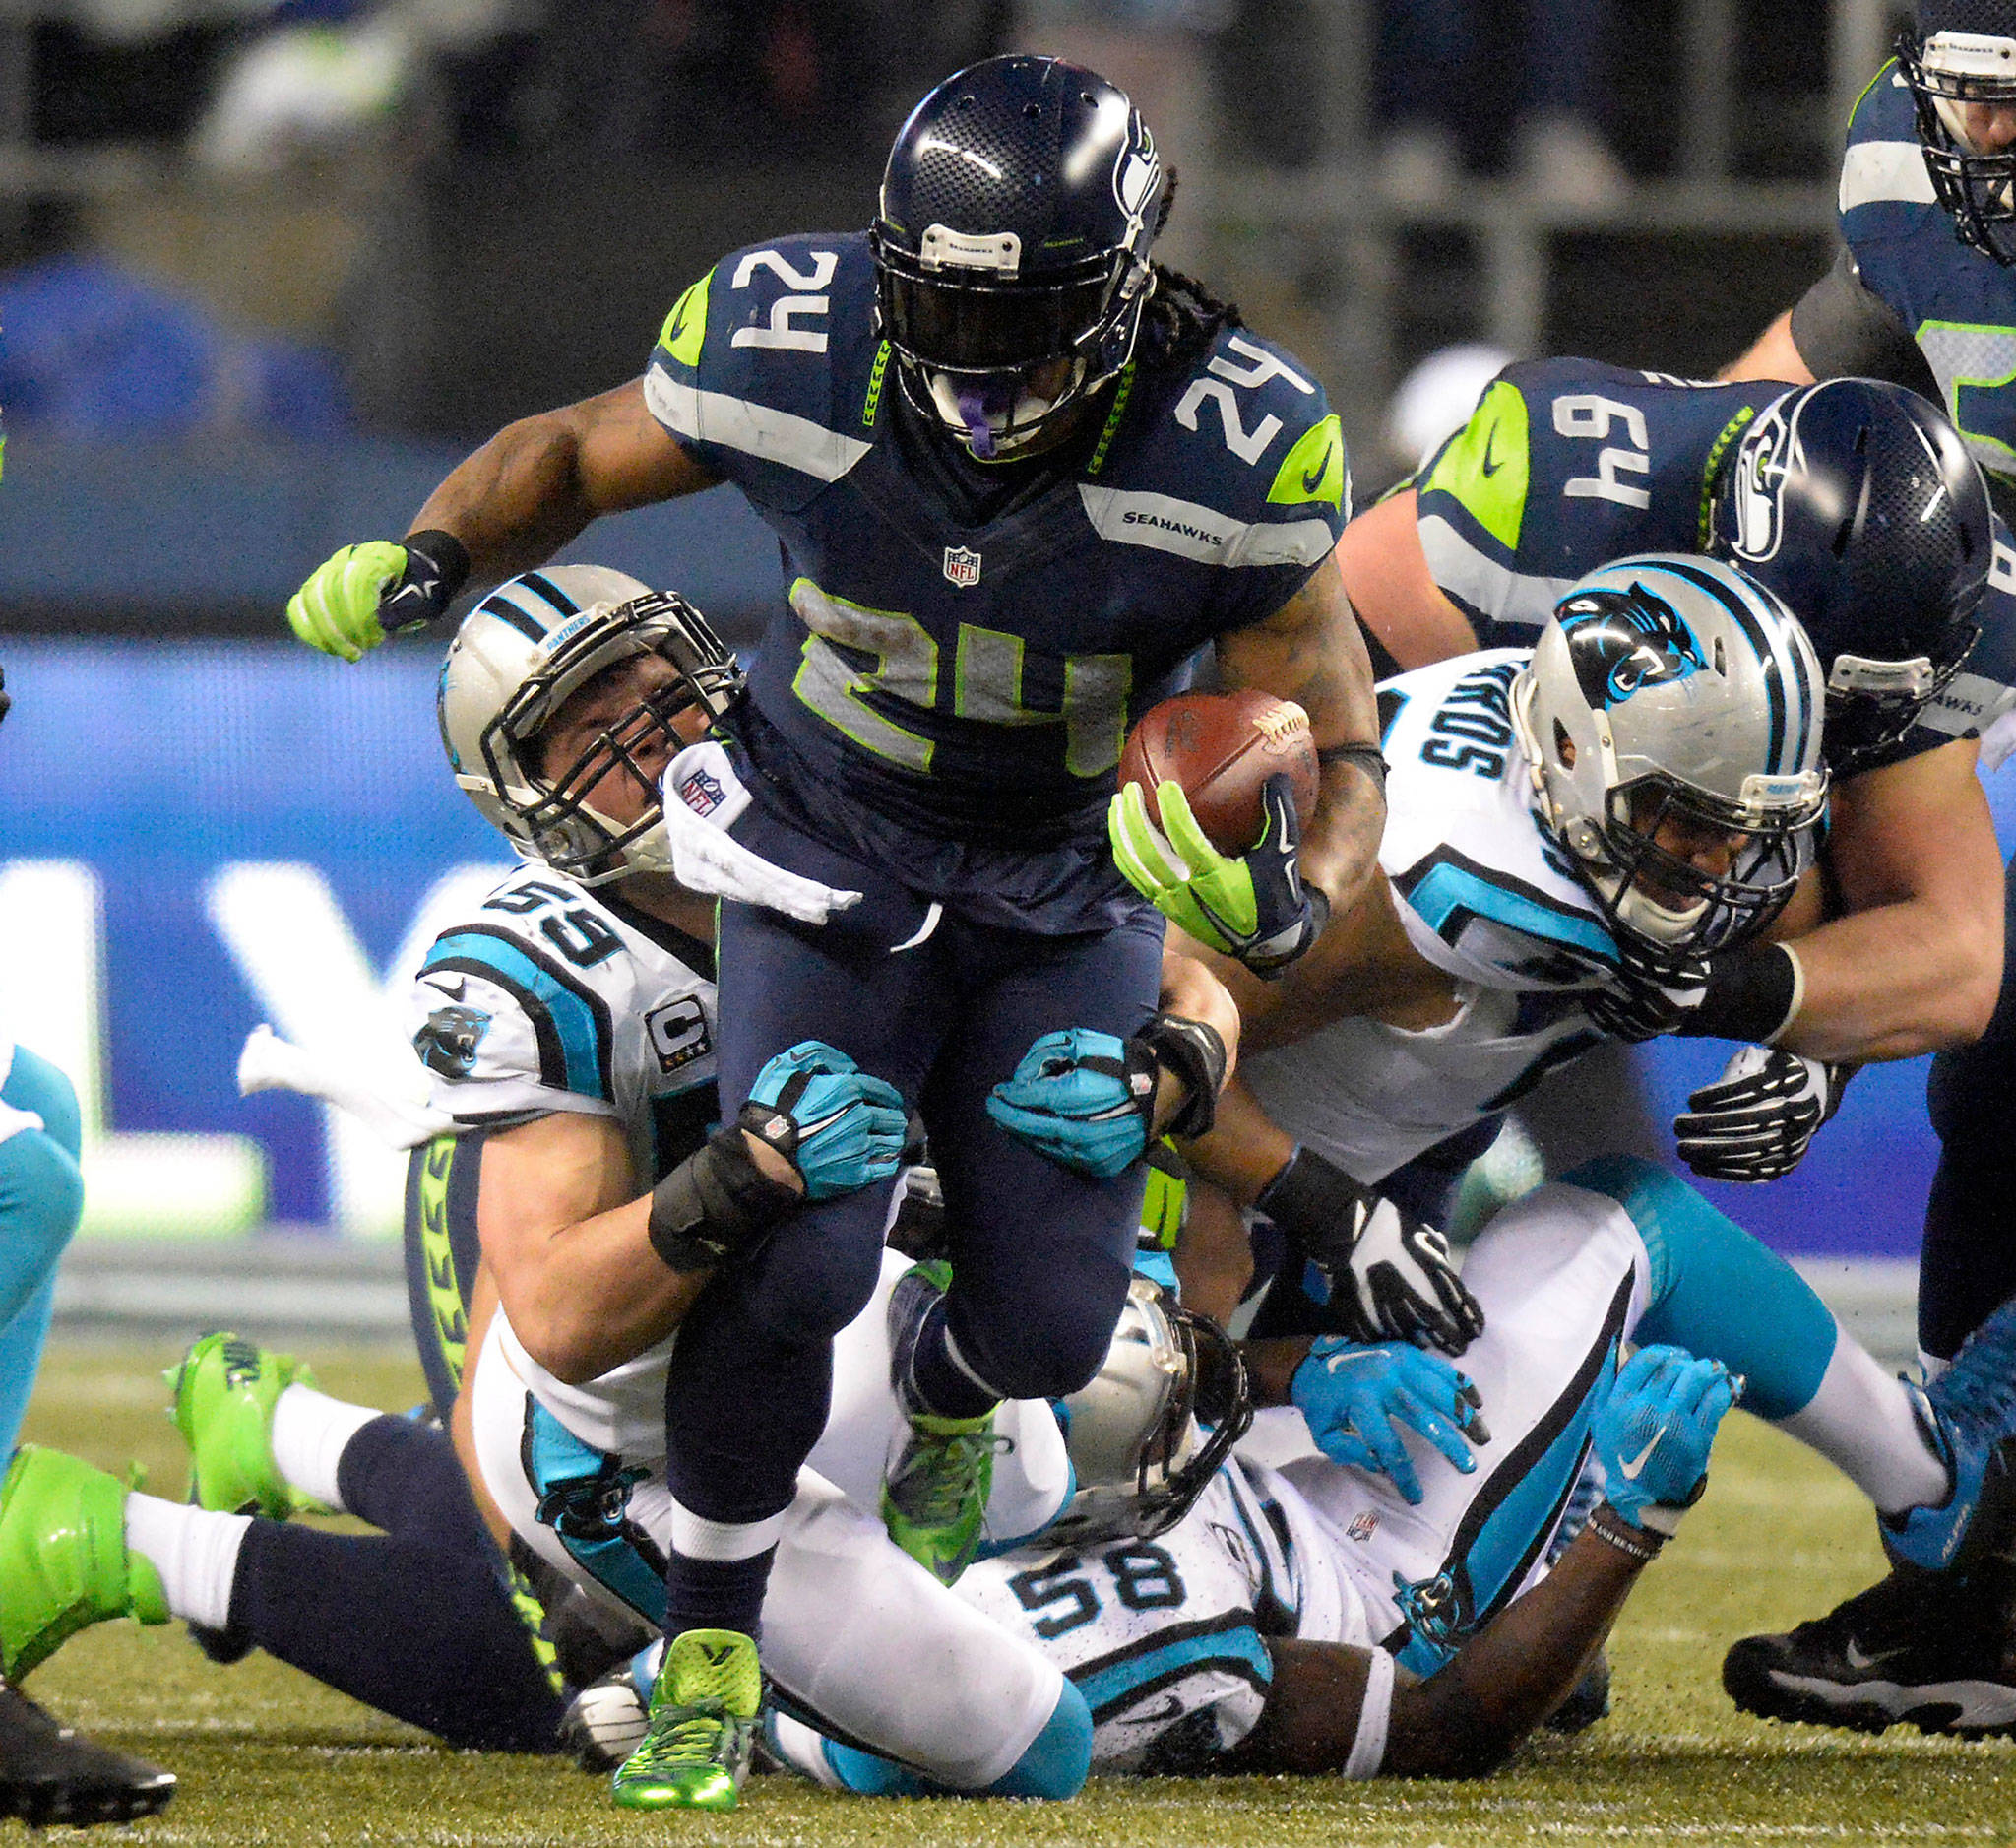 (David T. Foster, III | Charlotte Observer) Marshawn Lynch, seen here running against the Carolina Panthers during the 2014 NFC Divisional playoffs at CenturyLink Field in Seattle, is still retired from the NFL. However, the Oakland Raiders may possibly trade for his rights, just in case Lynch wants to return to the game with his hometown team.